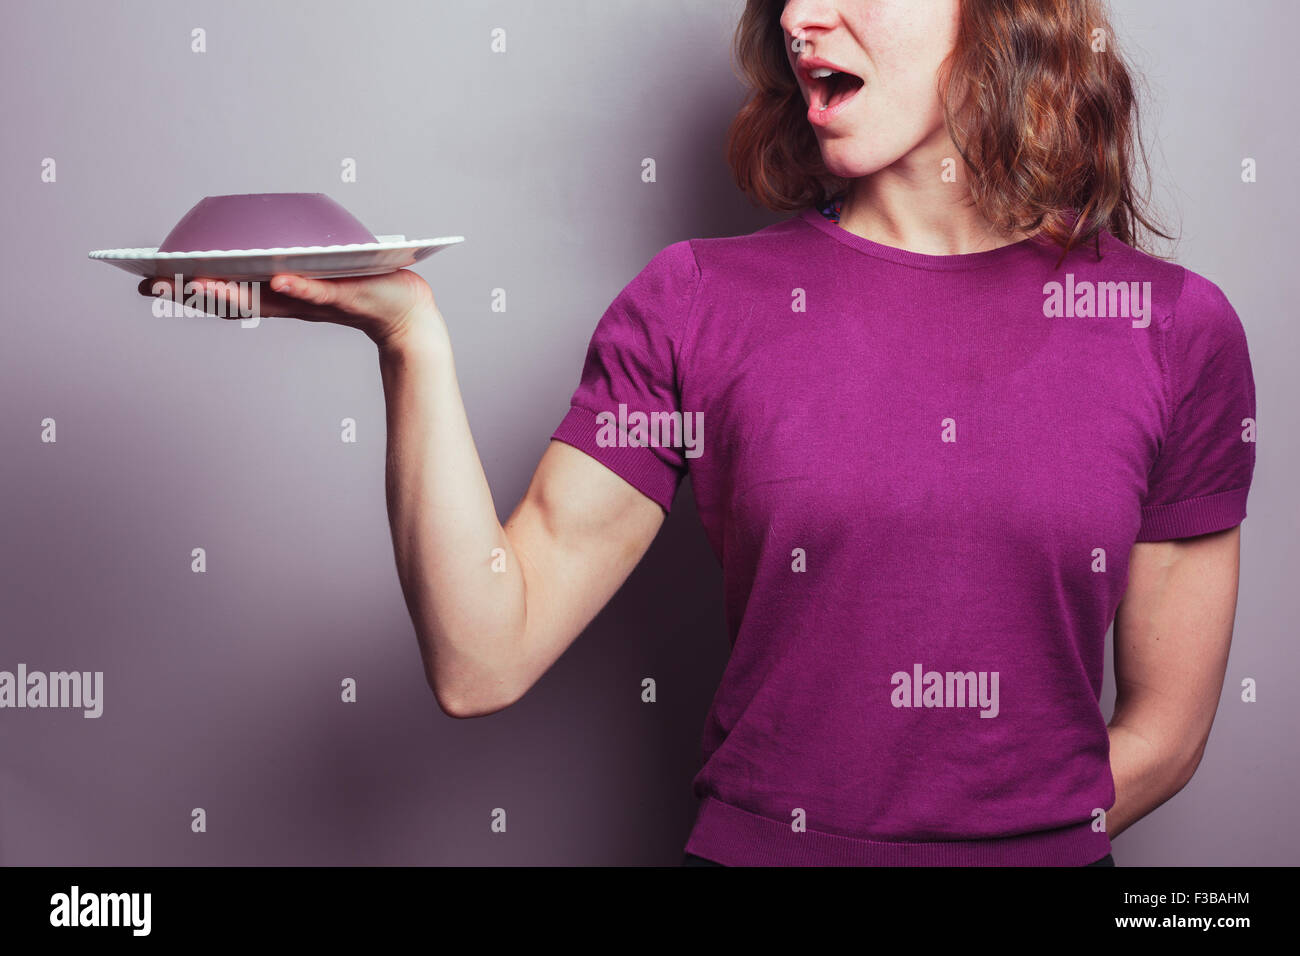 A young woman in a purple top is presenting a plate of jelly Stock Photo